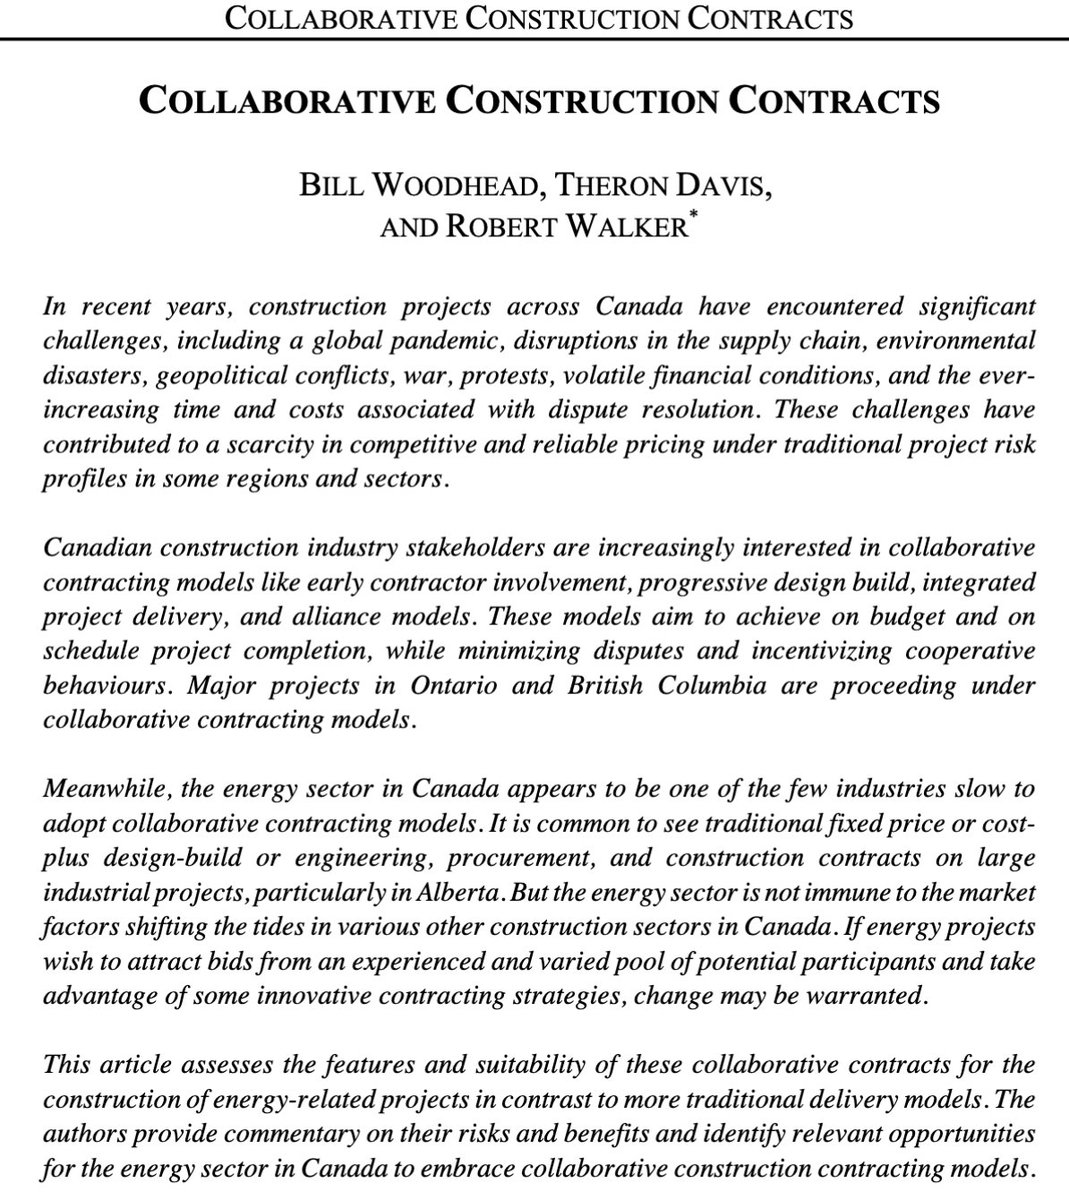 This article was written by lawyers from @BLGLaw and @Suncor. It assesses collaborative contracting models for energy-related construction projects 🇨🇦🏗️